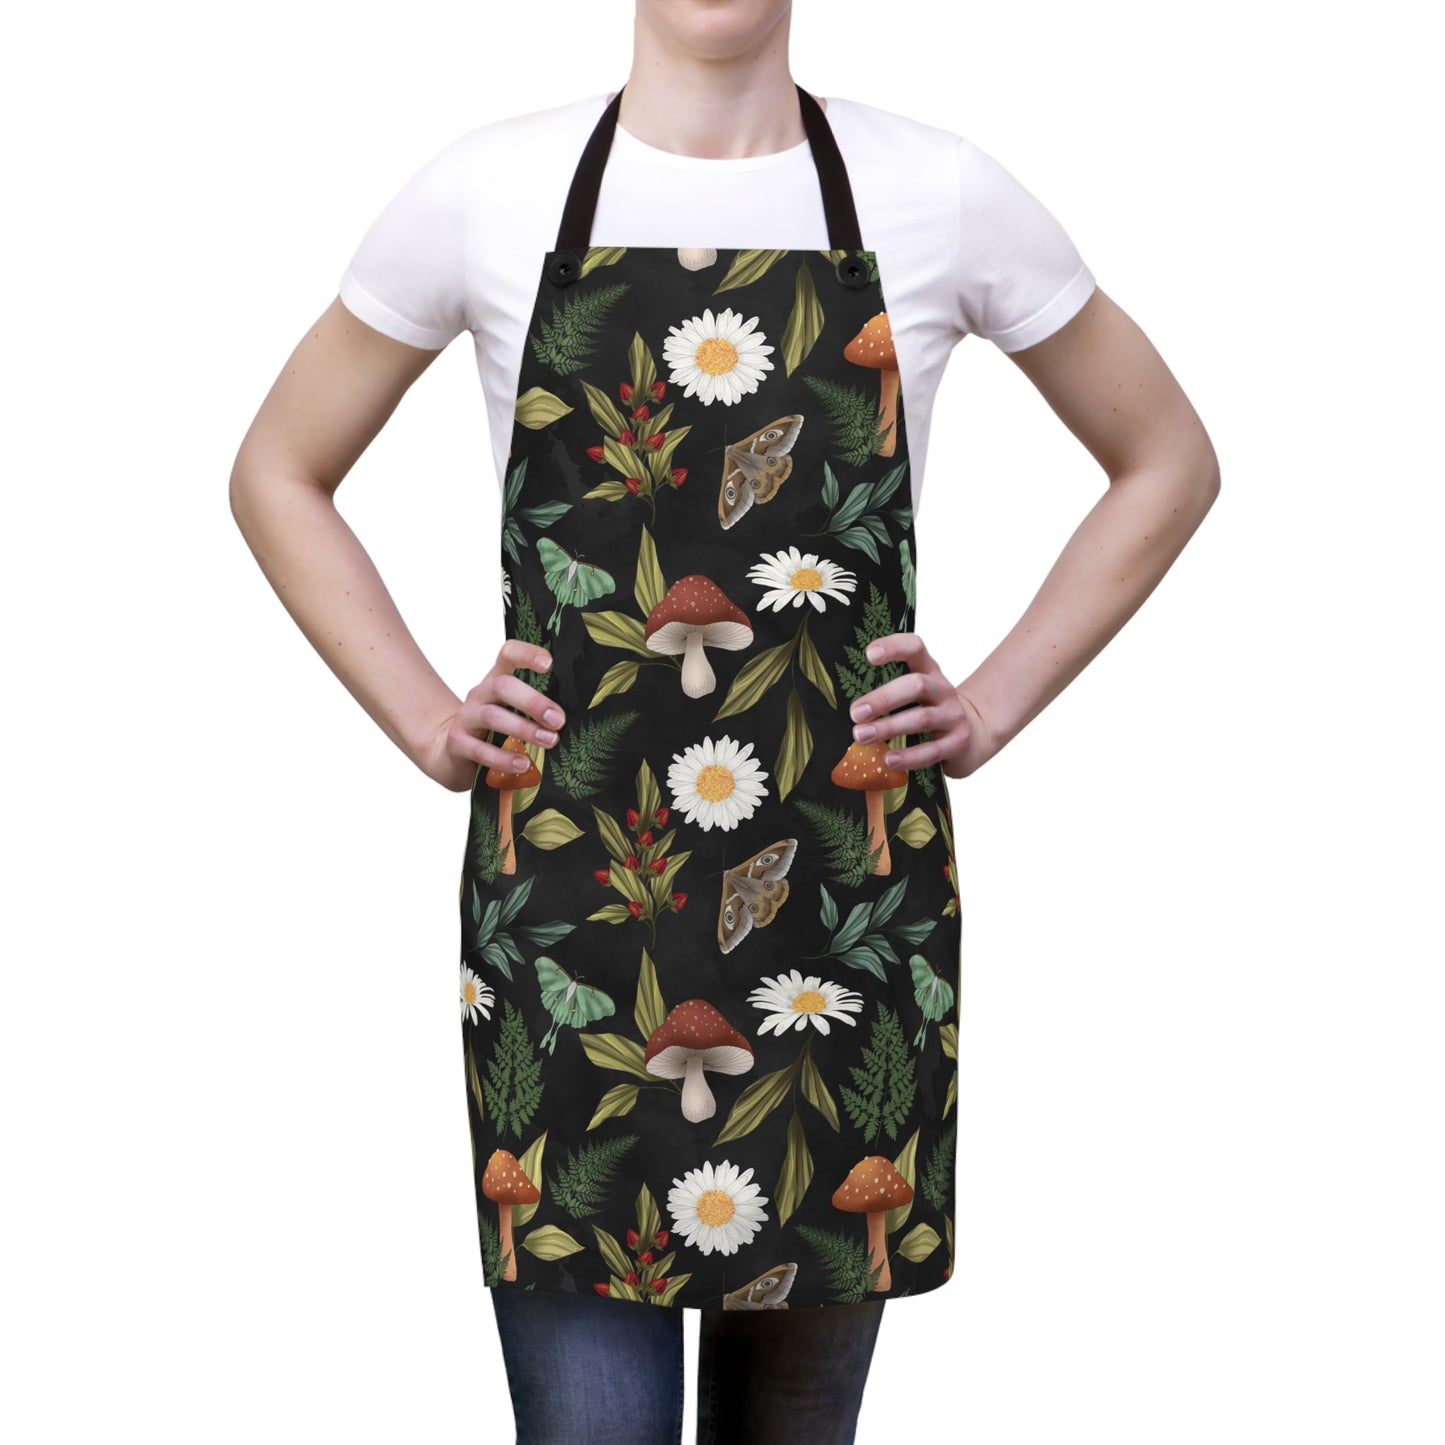 Kitchen Witch Apron - Featuring moths, mushrooms, botanicals, flowers & plants -  One Size - witchy gift, pagan gift, wiccan gift